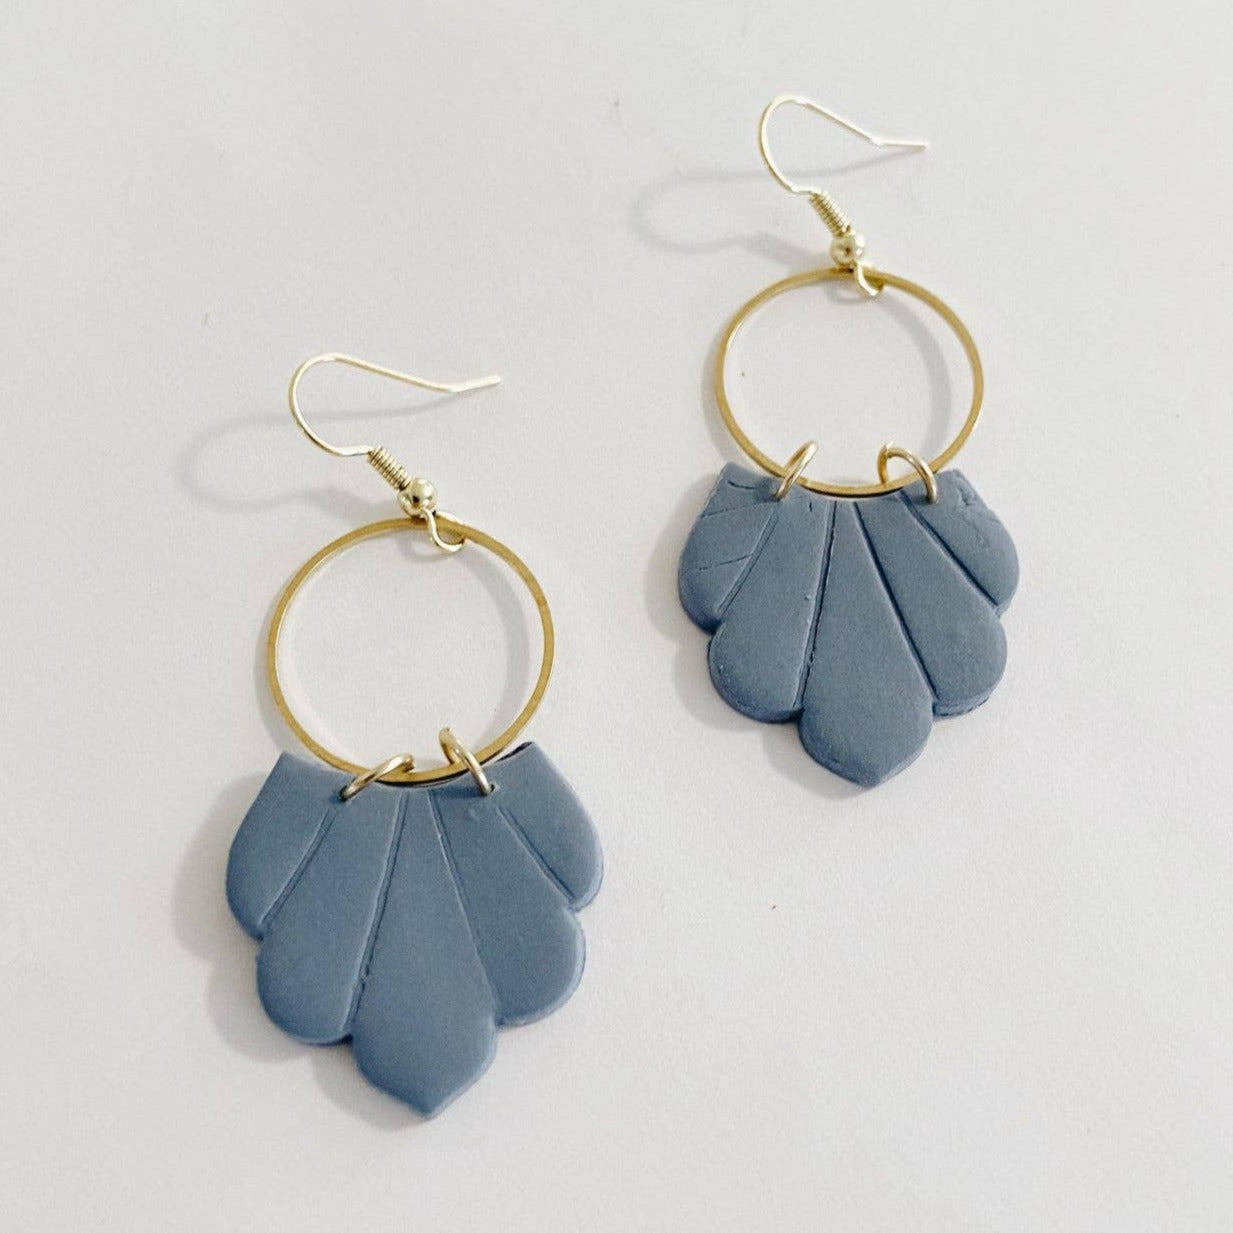 Claire in Dusty Blue, Polymer Clay Earrings